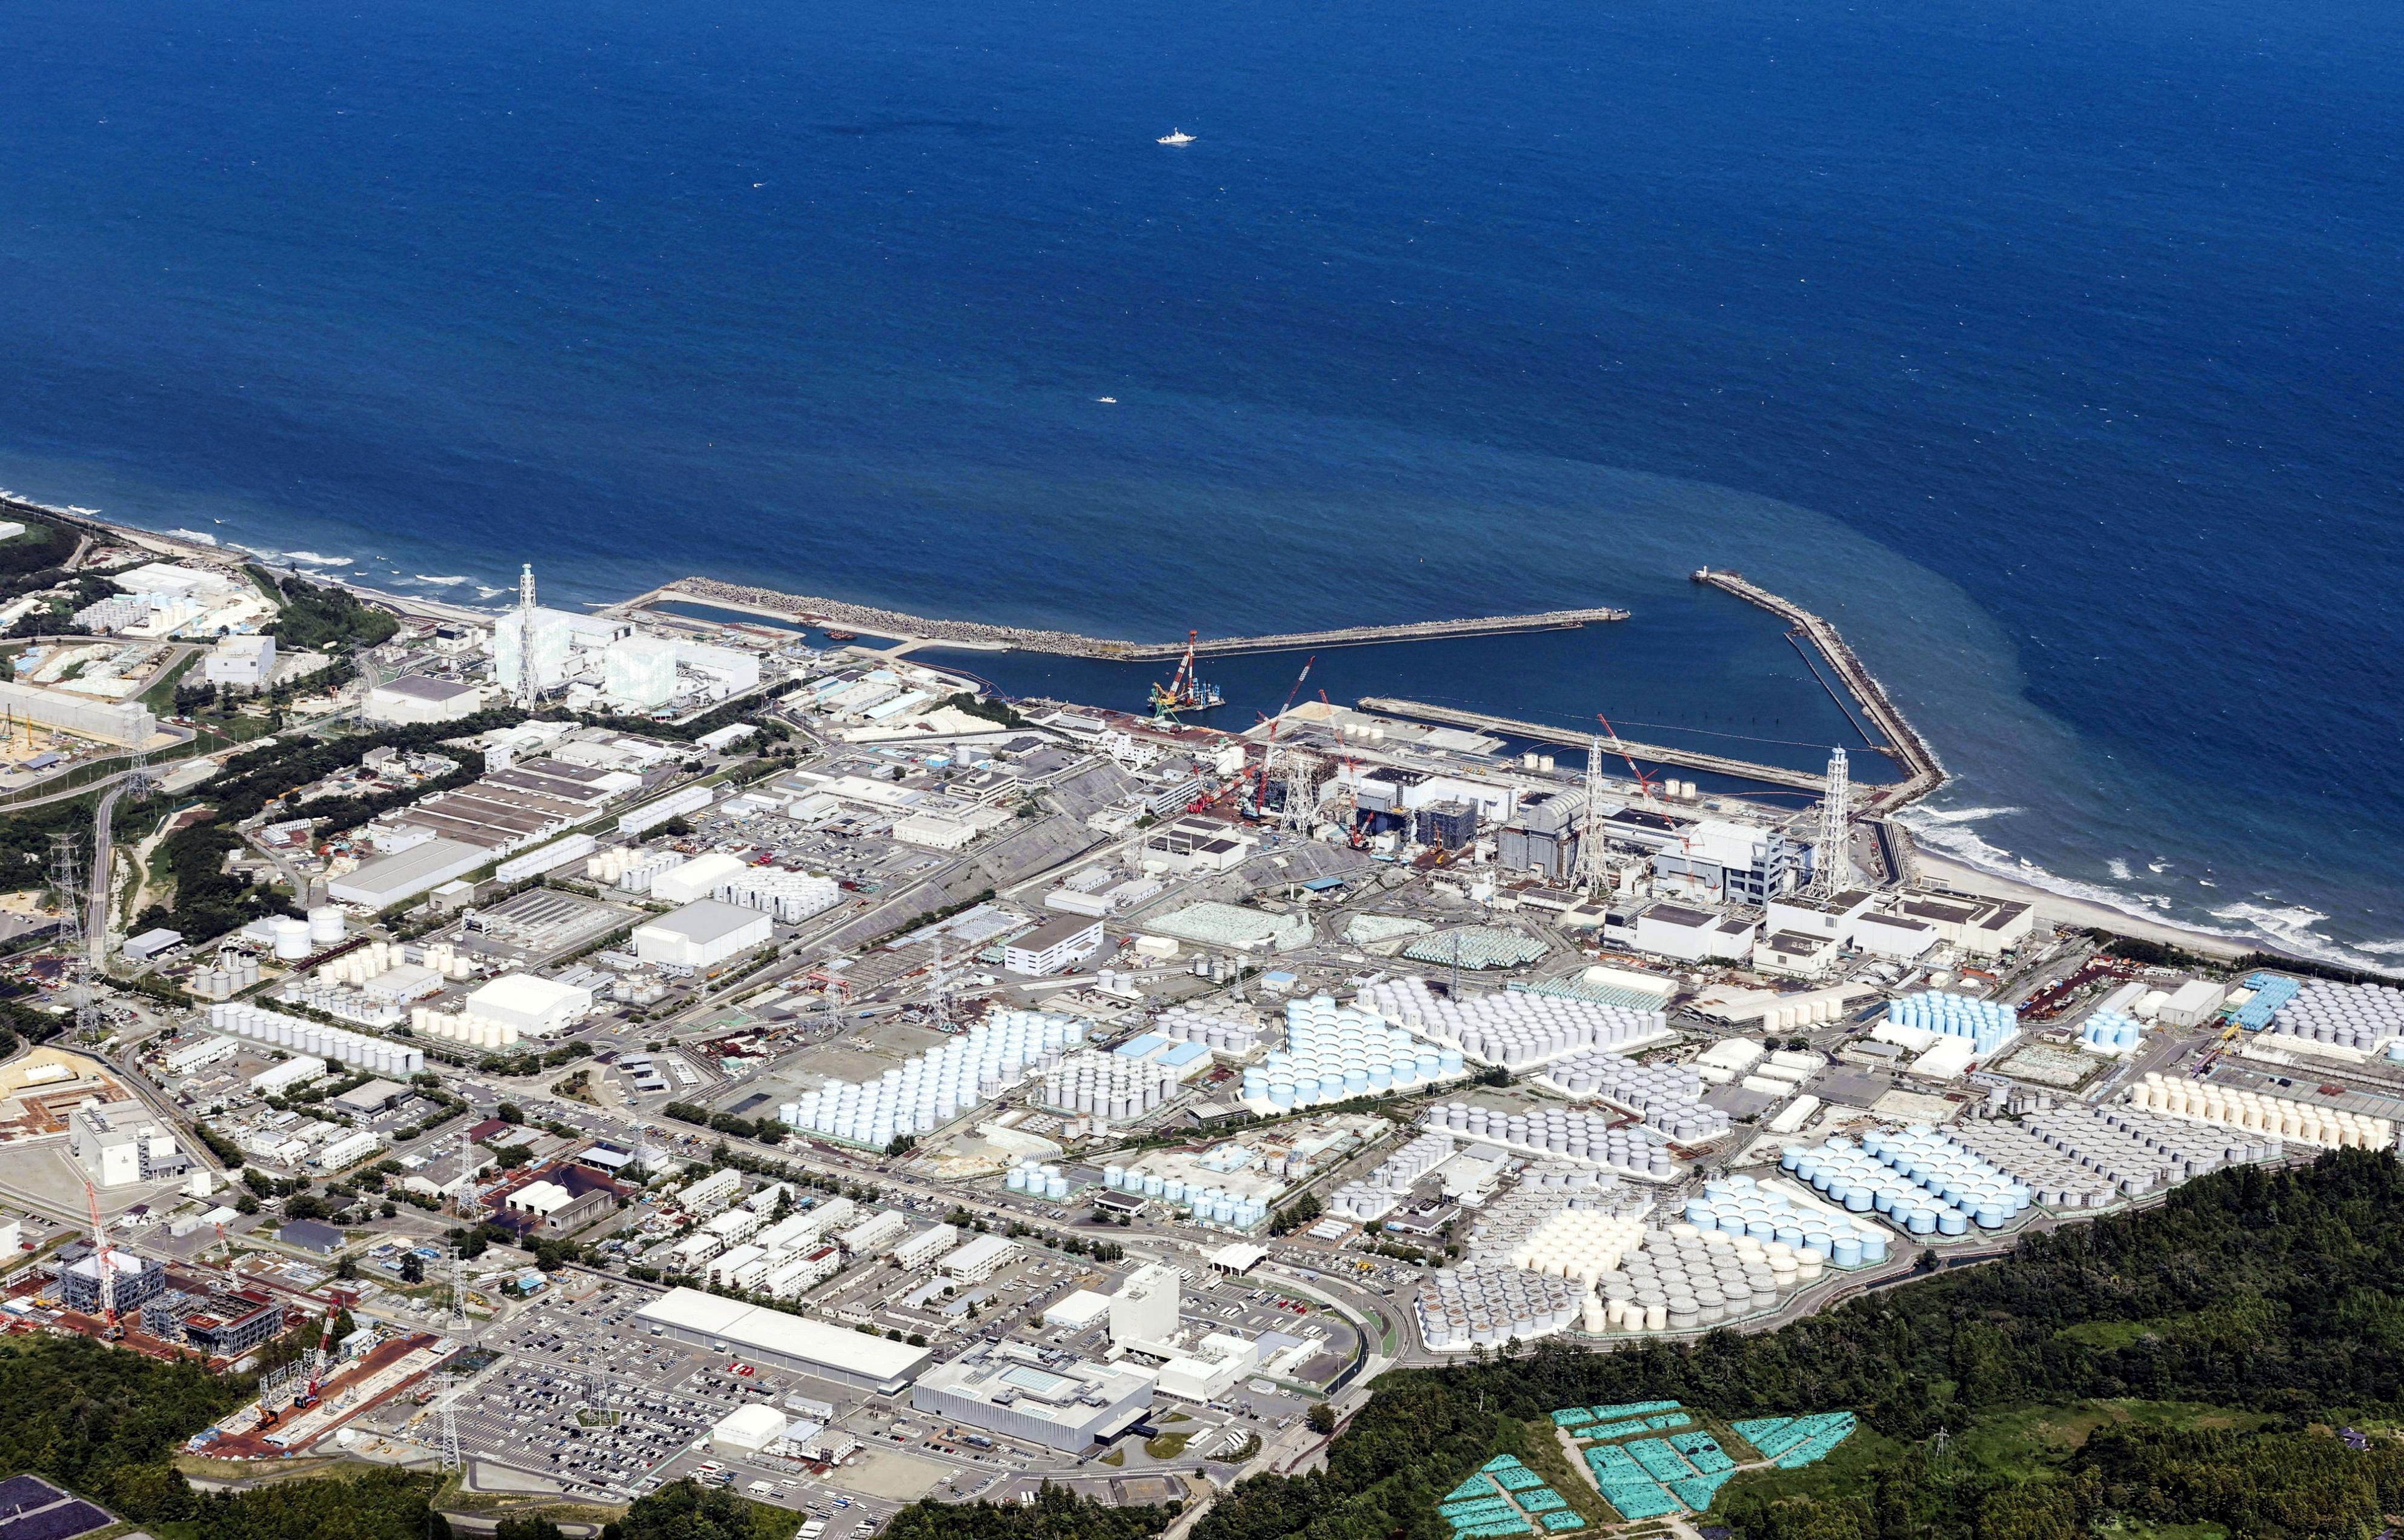 The Fukushima Daiichi nuclear power plant started releasing treated radioactive water into the Pacific Ocean in August. Photo: Kyodo via Reuters